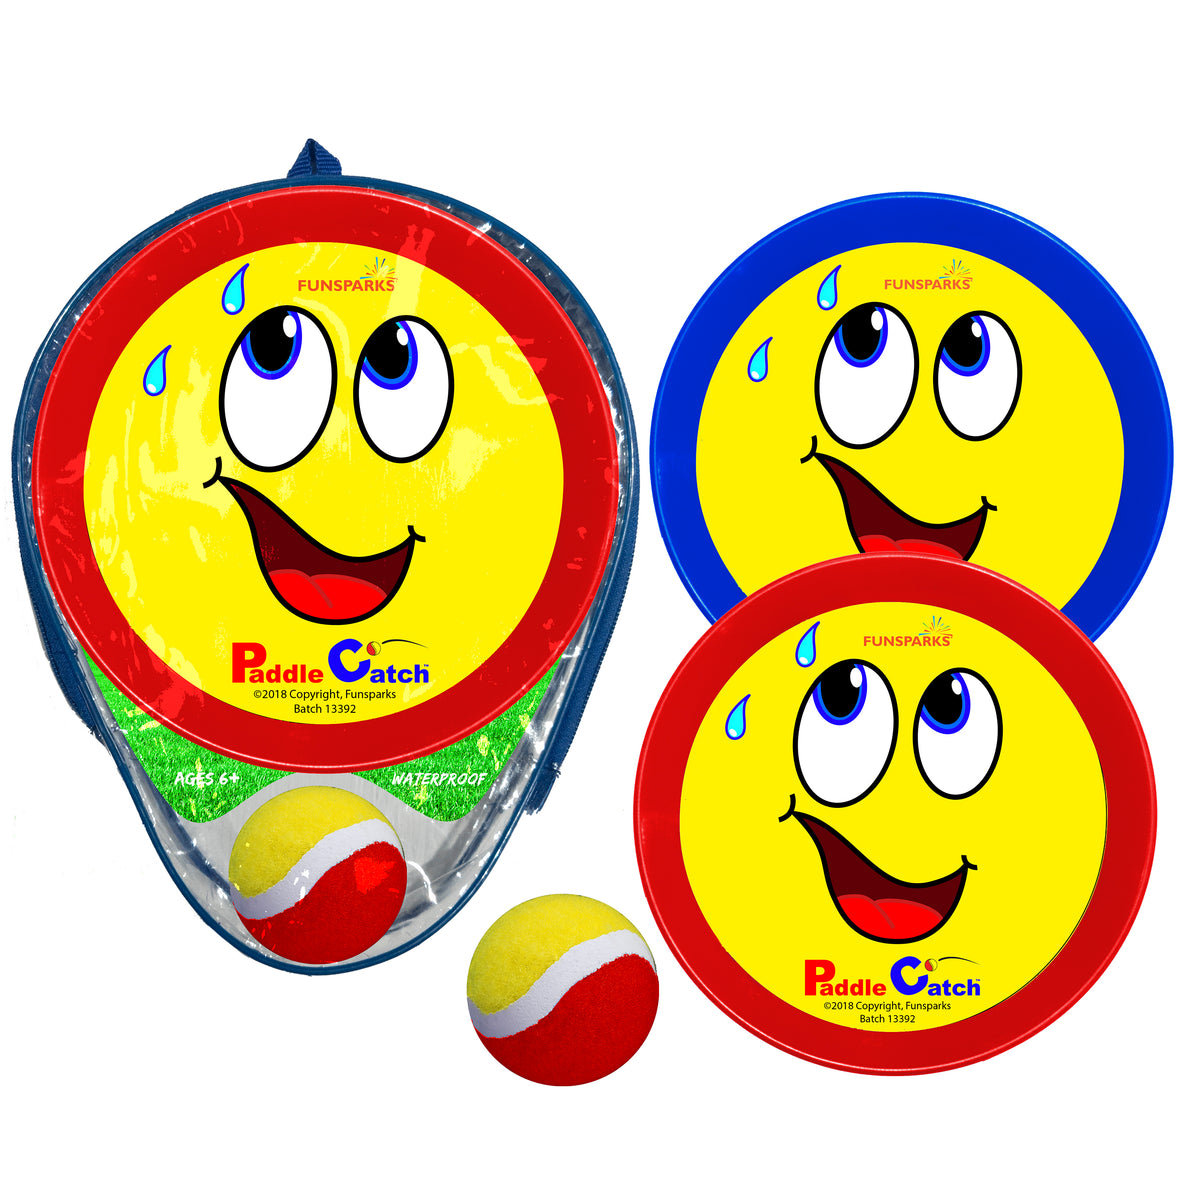 Kids Toys Toss and Catch Game Set 20 Paddles 10 Balls Beach Game